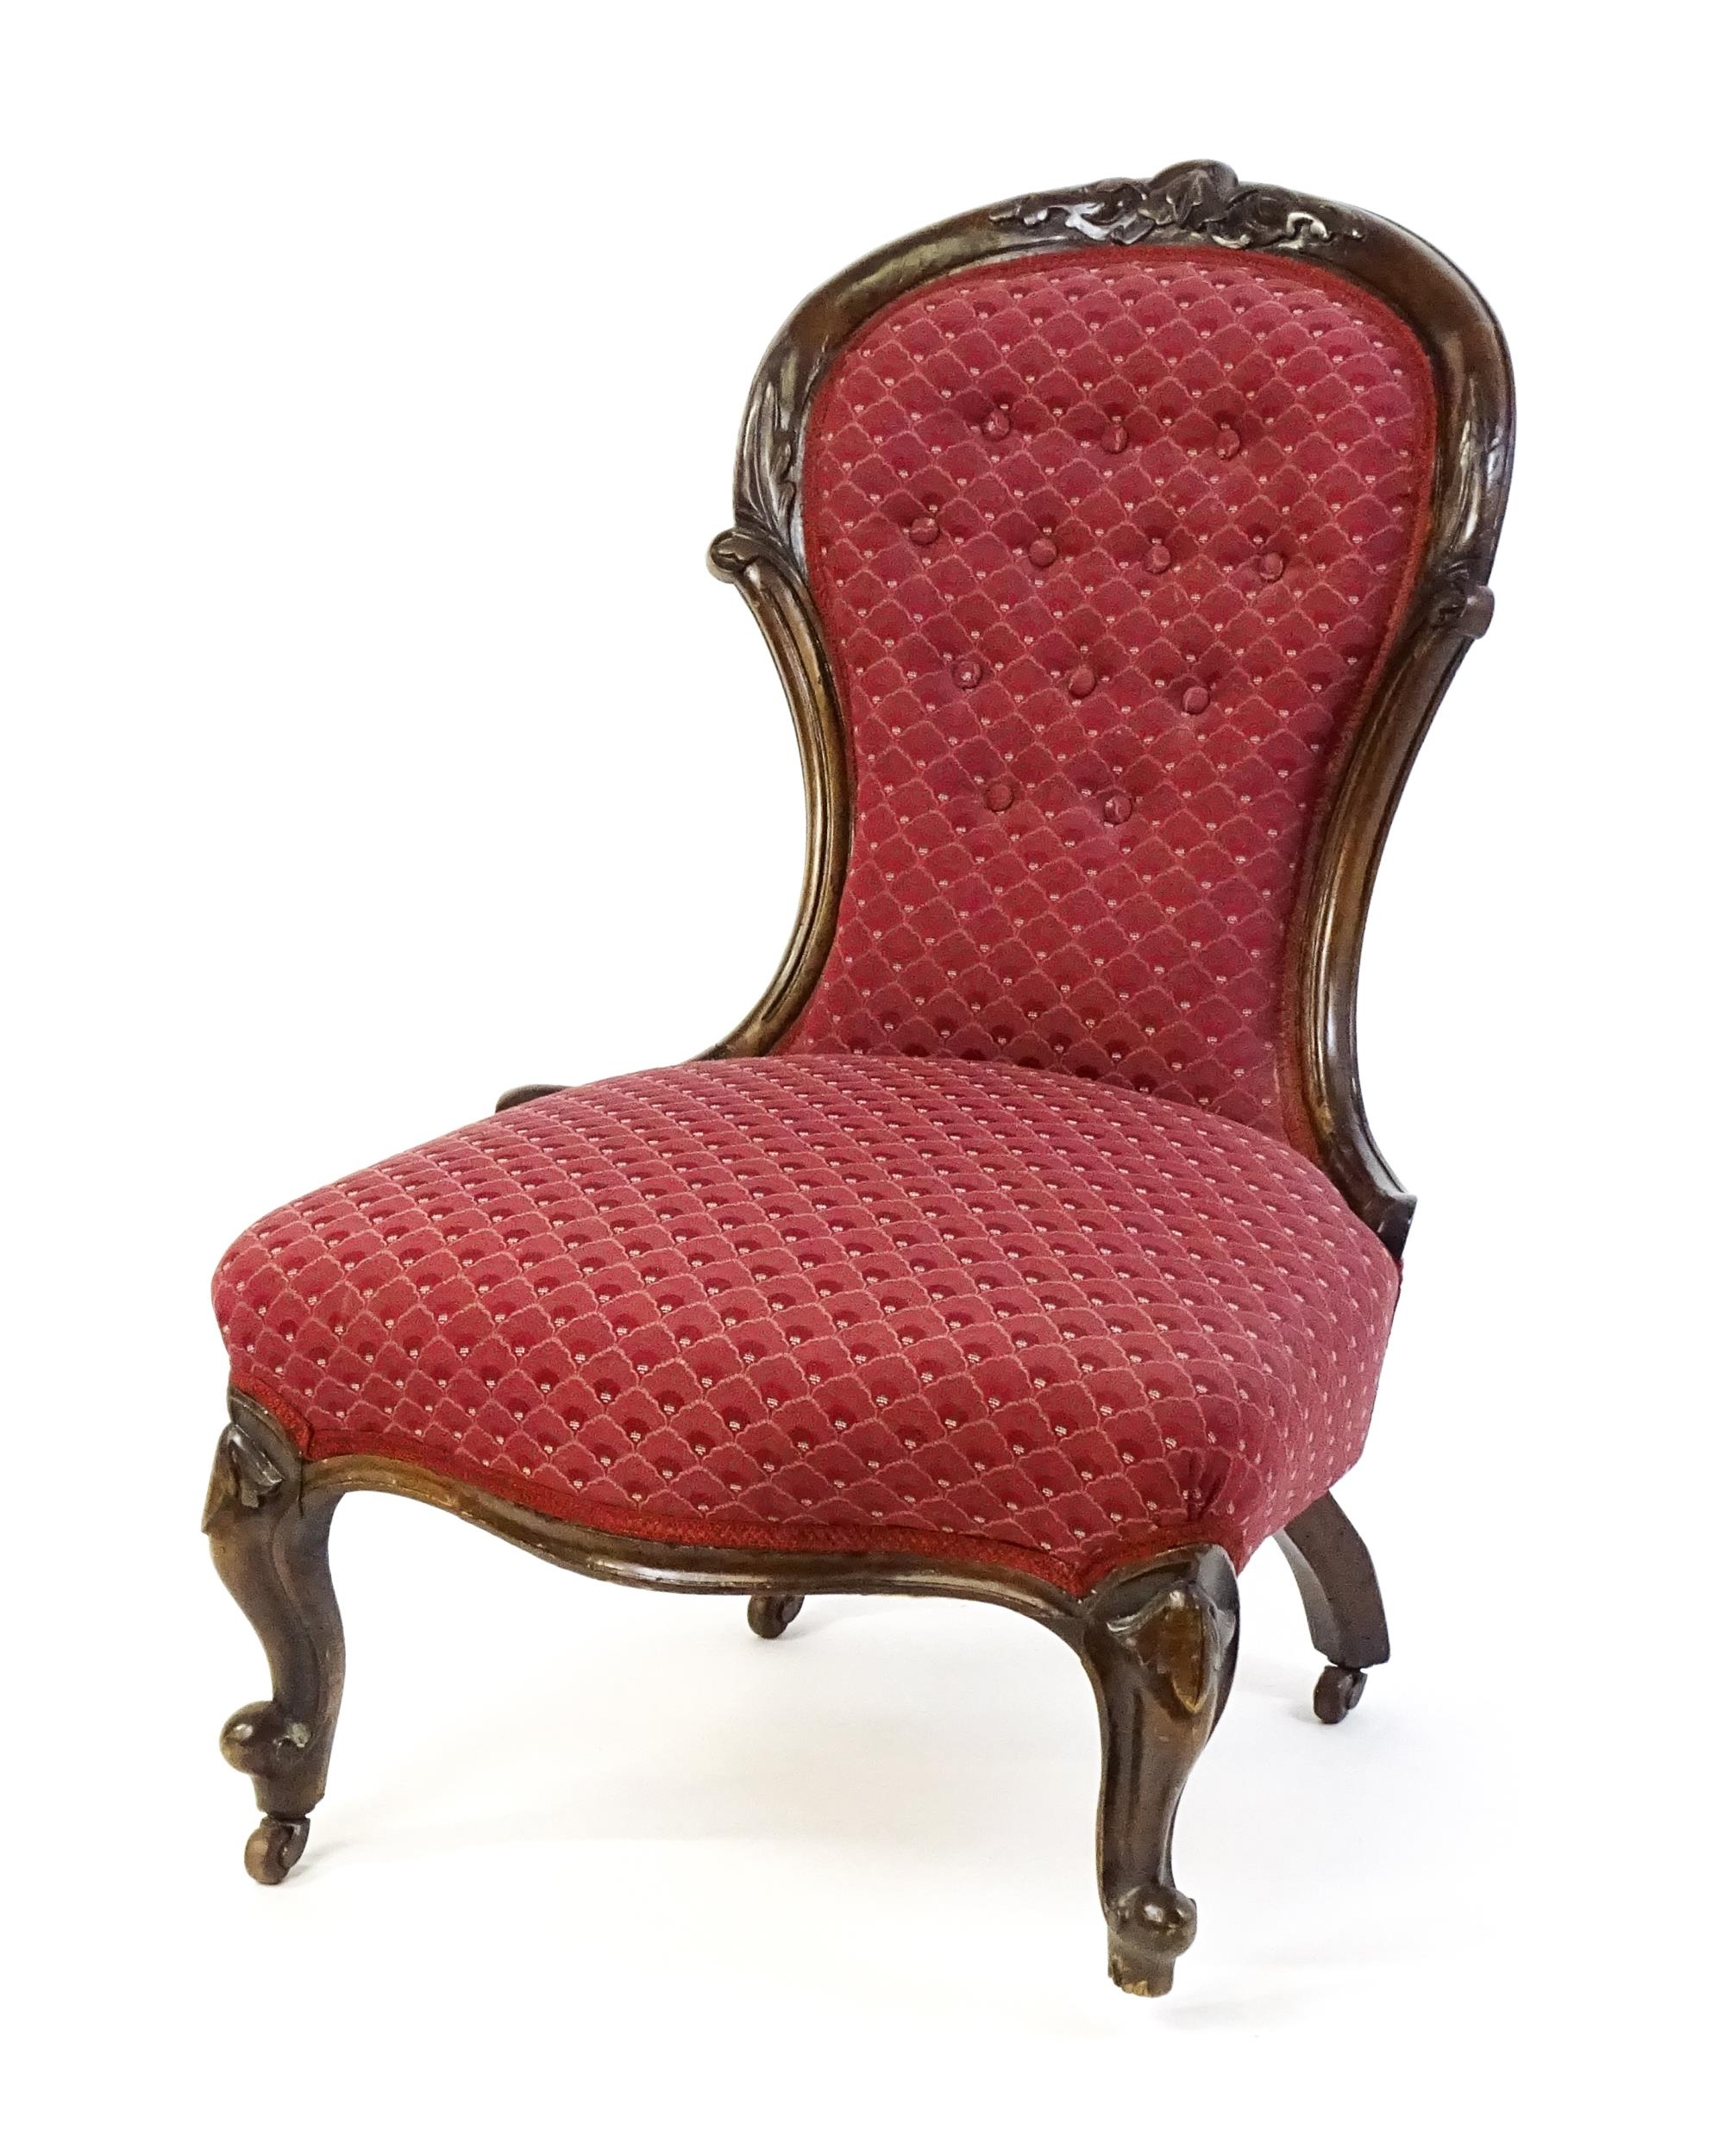 A late 19thC / early 20thC nursing chair with a deep buttoned spoon back adorned with a carved